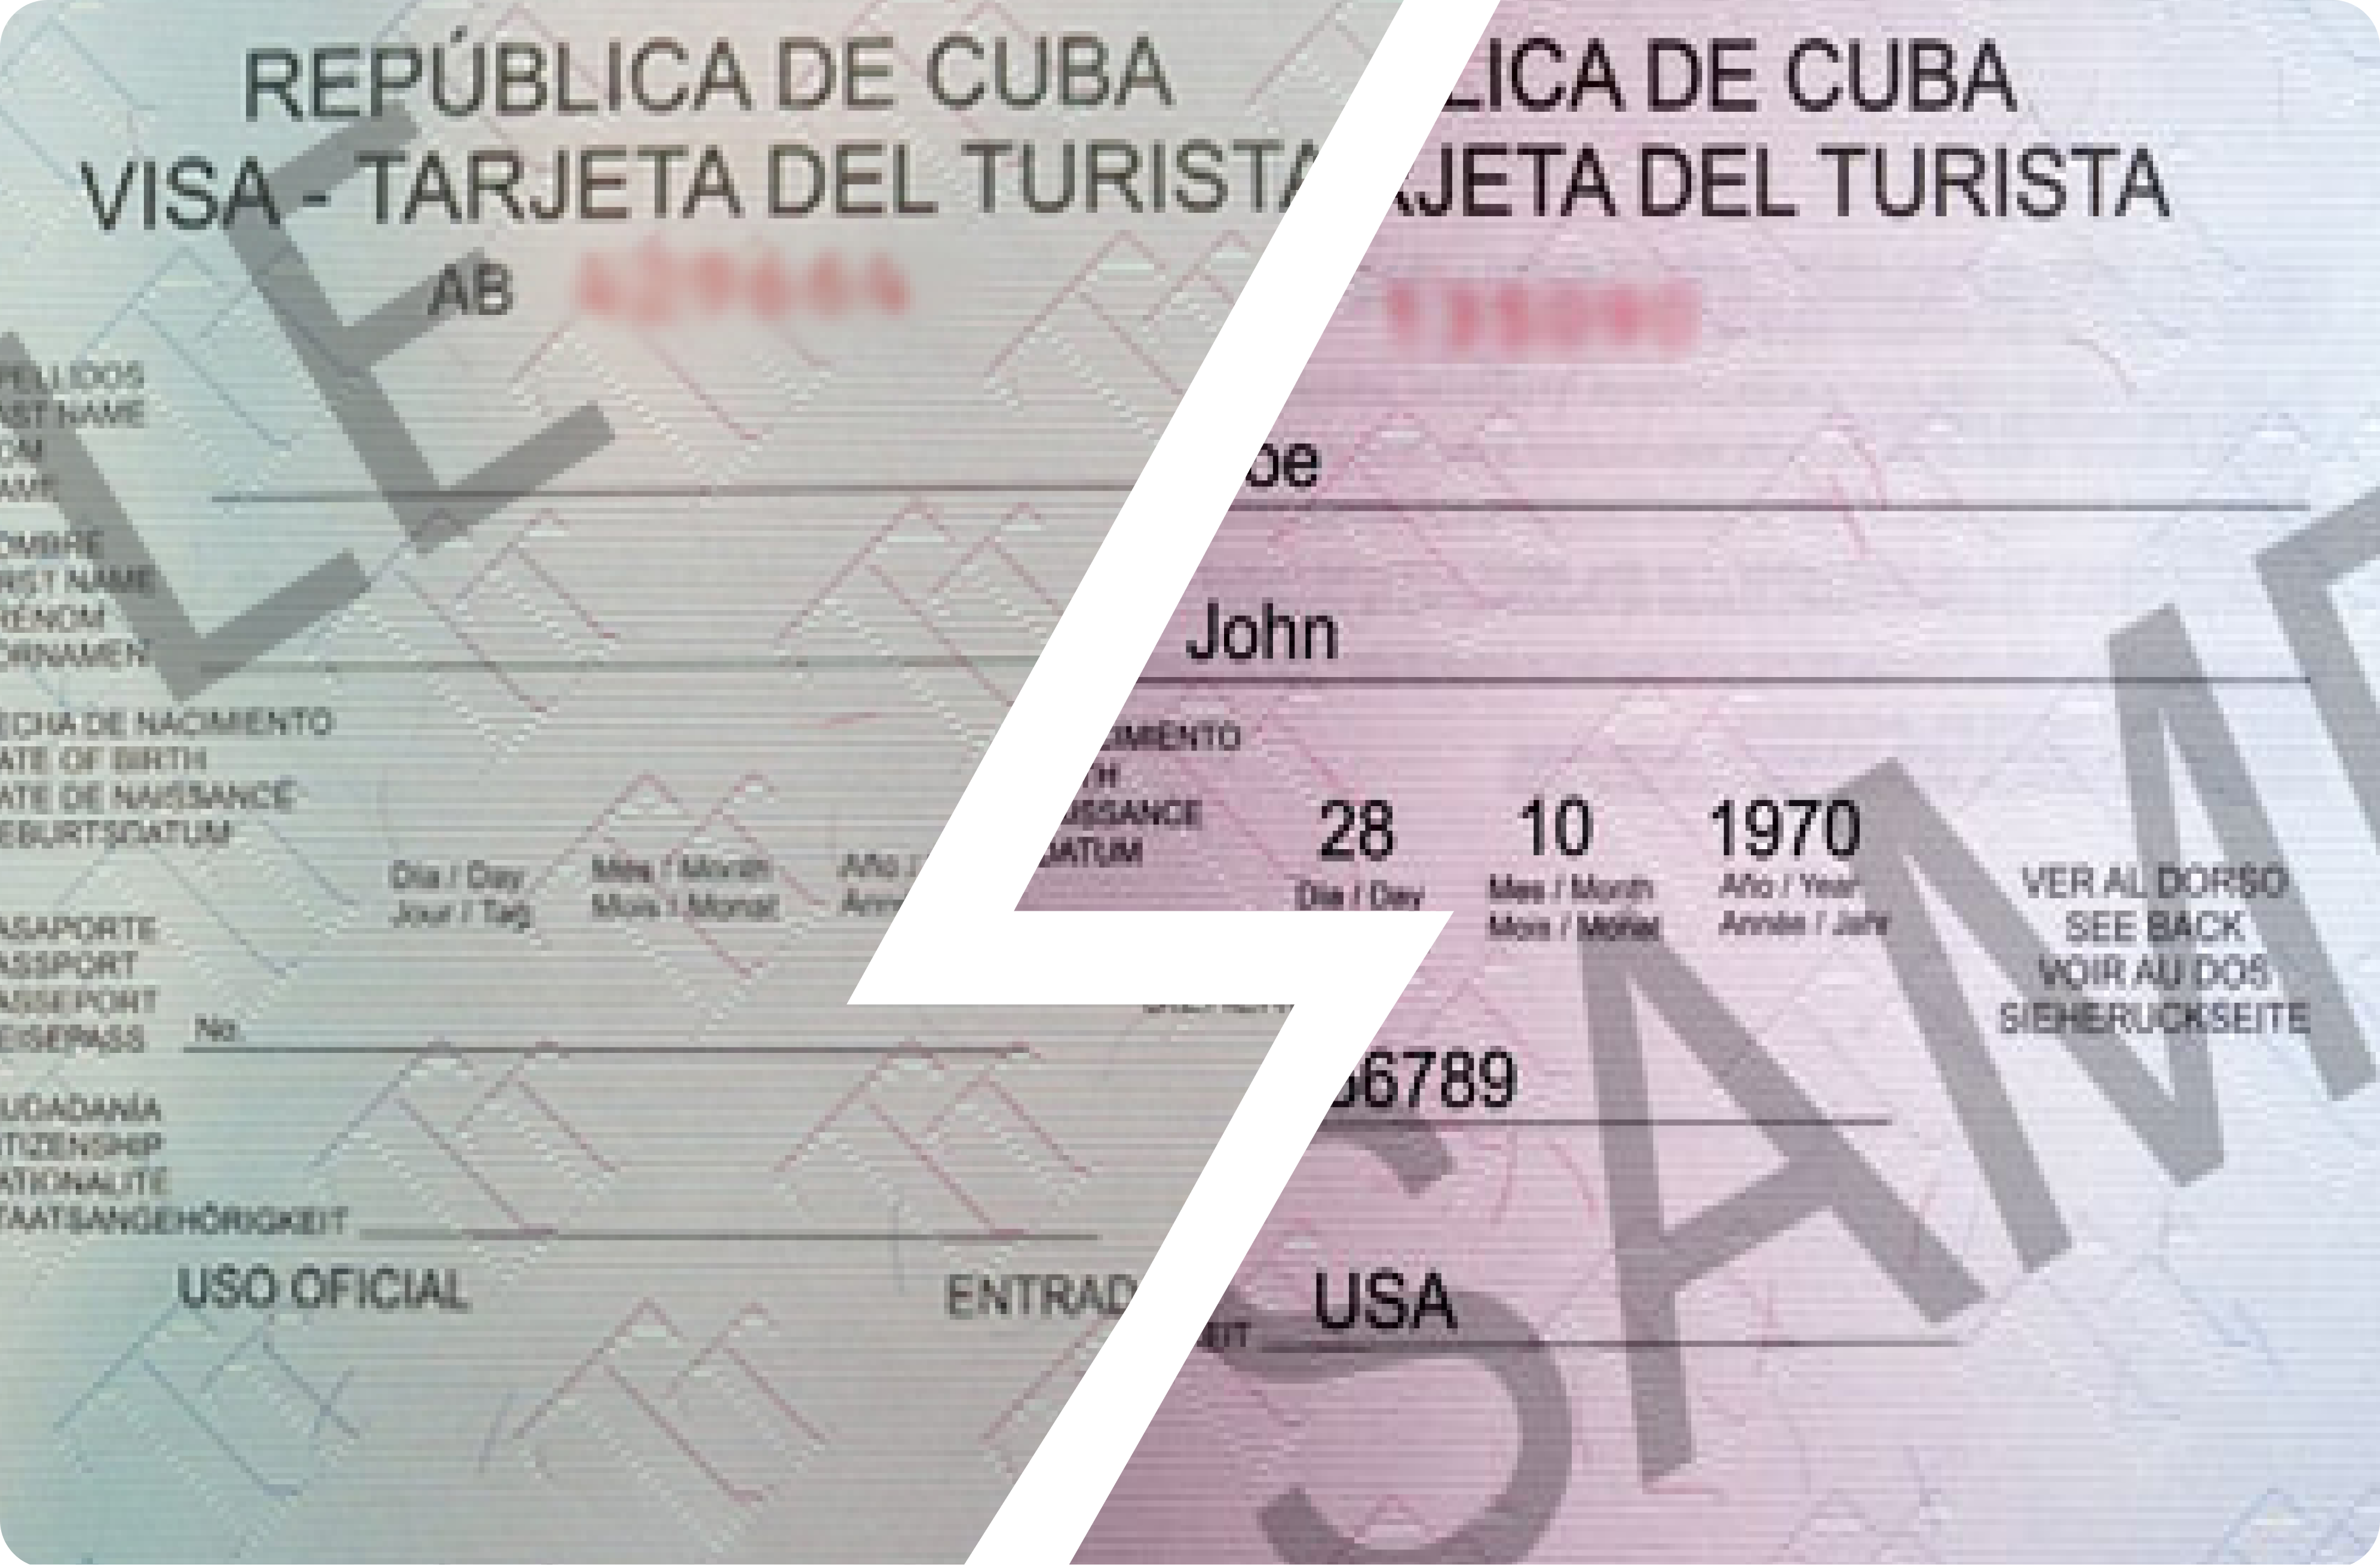 Cuba-Bound? Here’s Everything You Need to Know About How to Get a Cuban Tourist Card